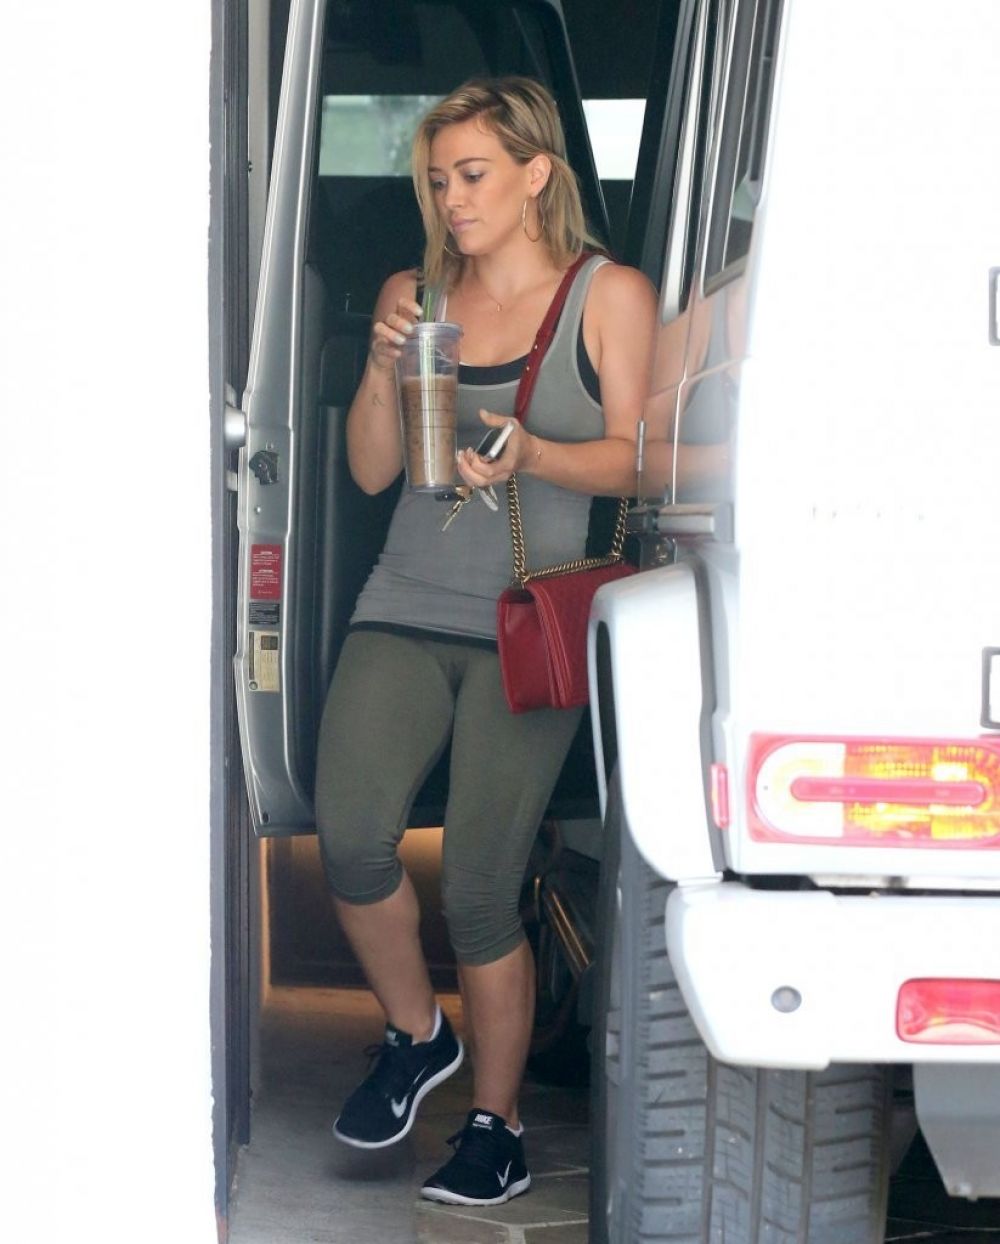 hilary-duff-arrives-at-a-gym-in-west-hollywood-0206_2.